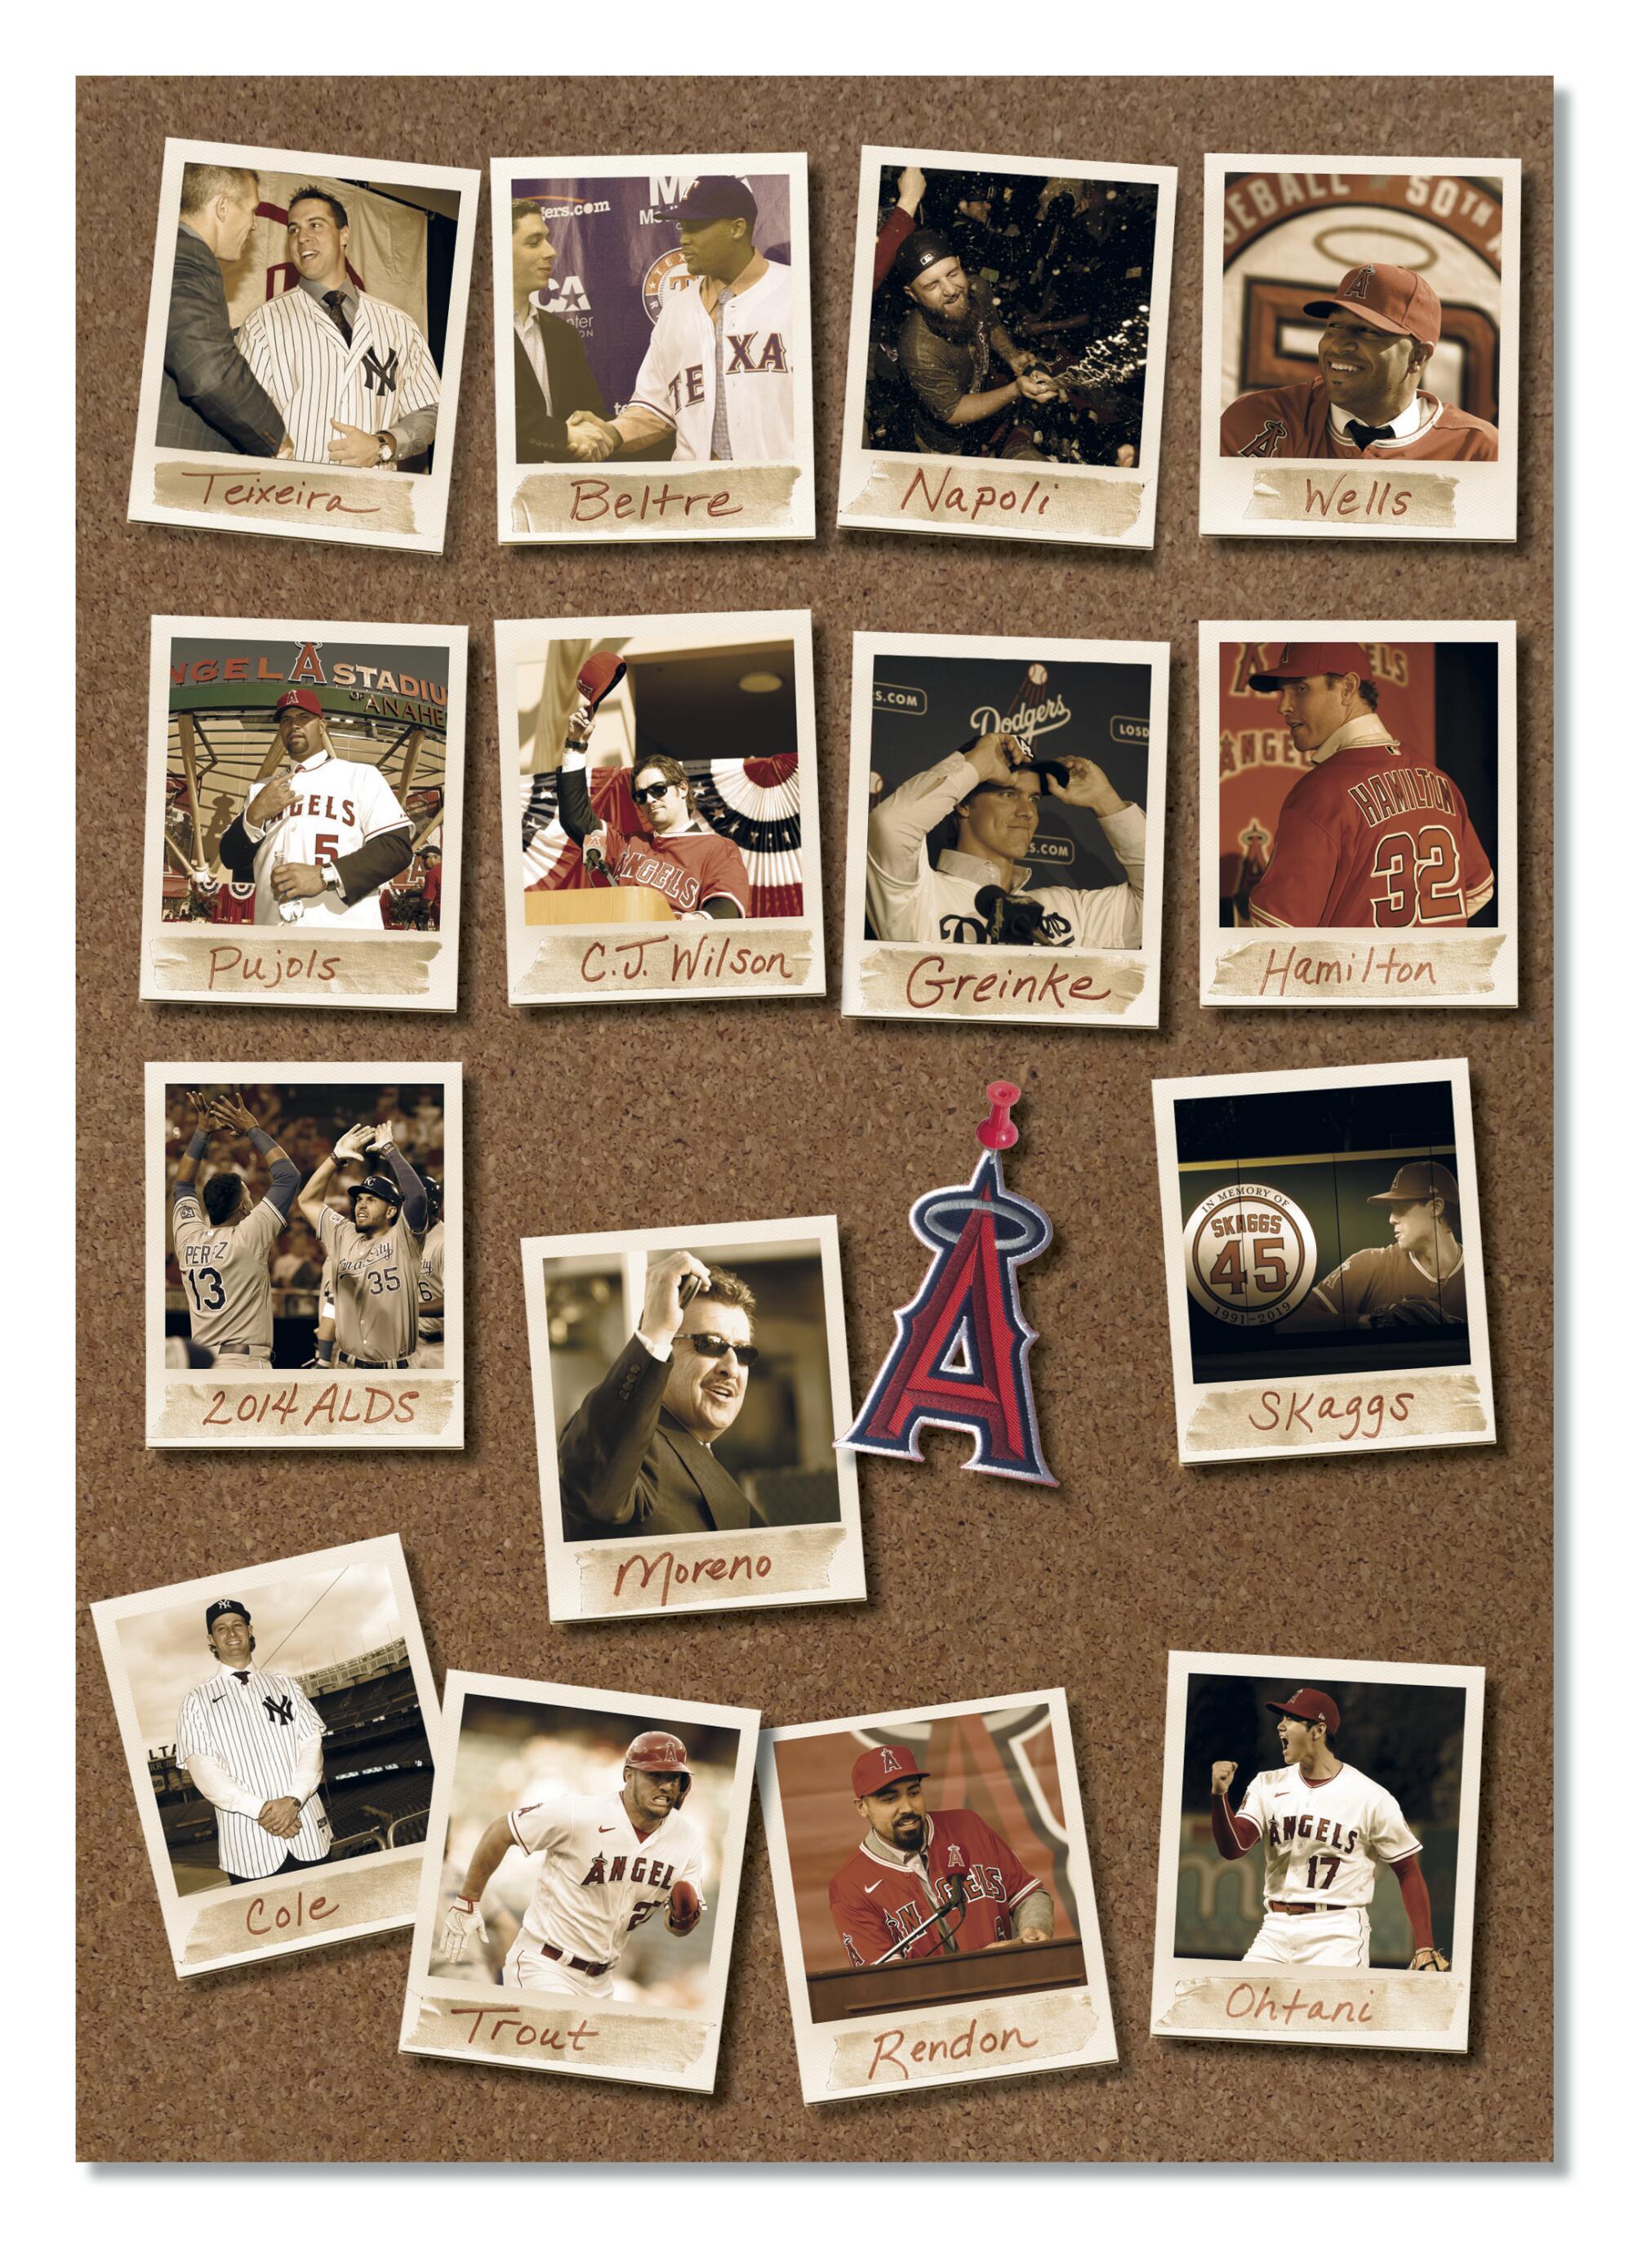 A photo illustration of a cork board with old-looking polaroid-like photos of various Angels players and personnel.